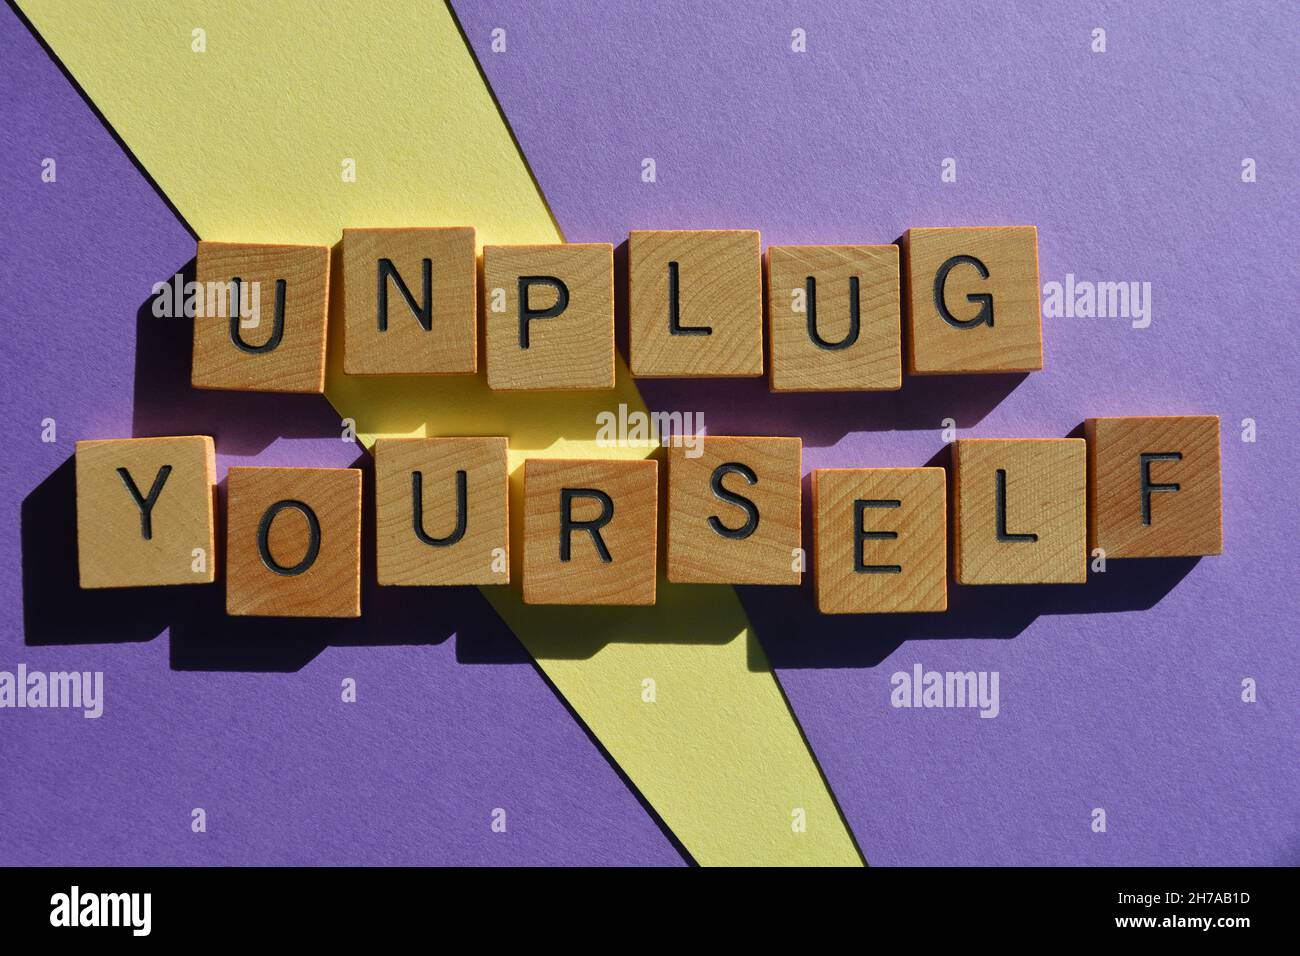 Unplug Yourself, words in wooden alphabet letters isolated on purple and yellow background Stock Photo